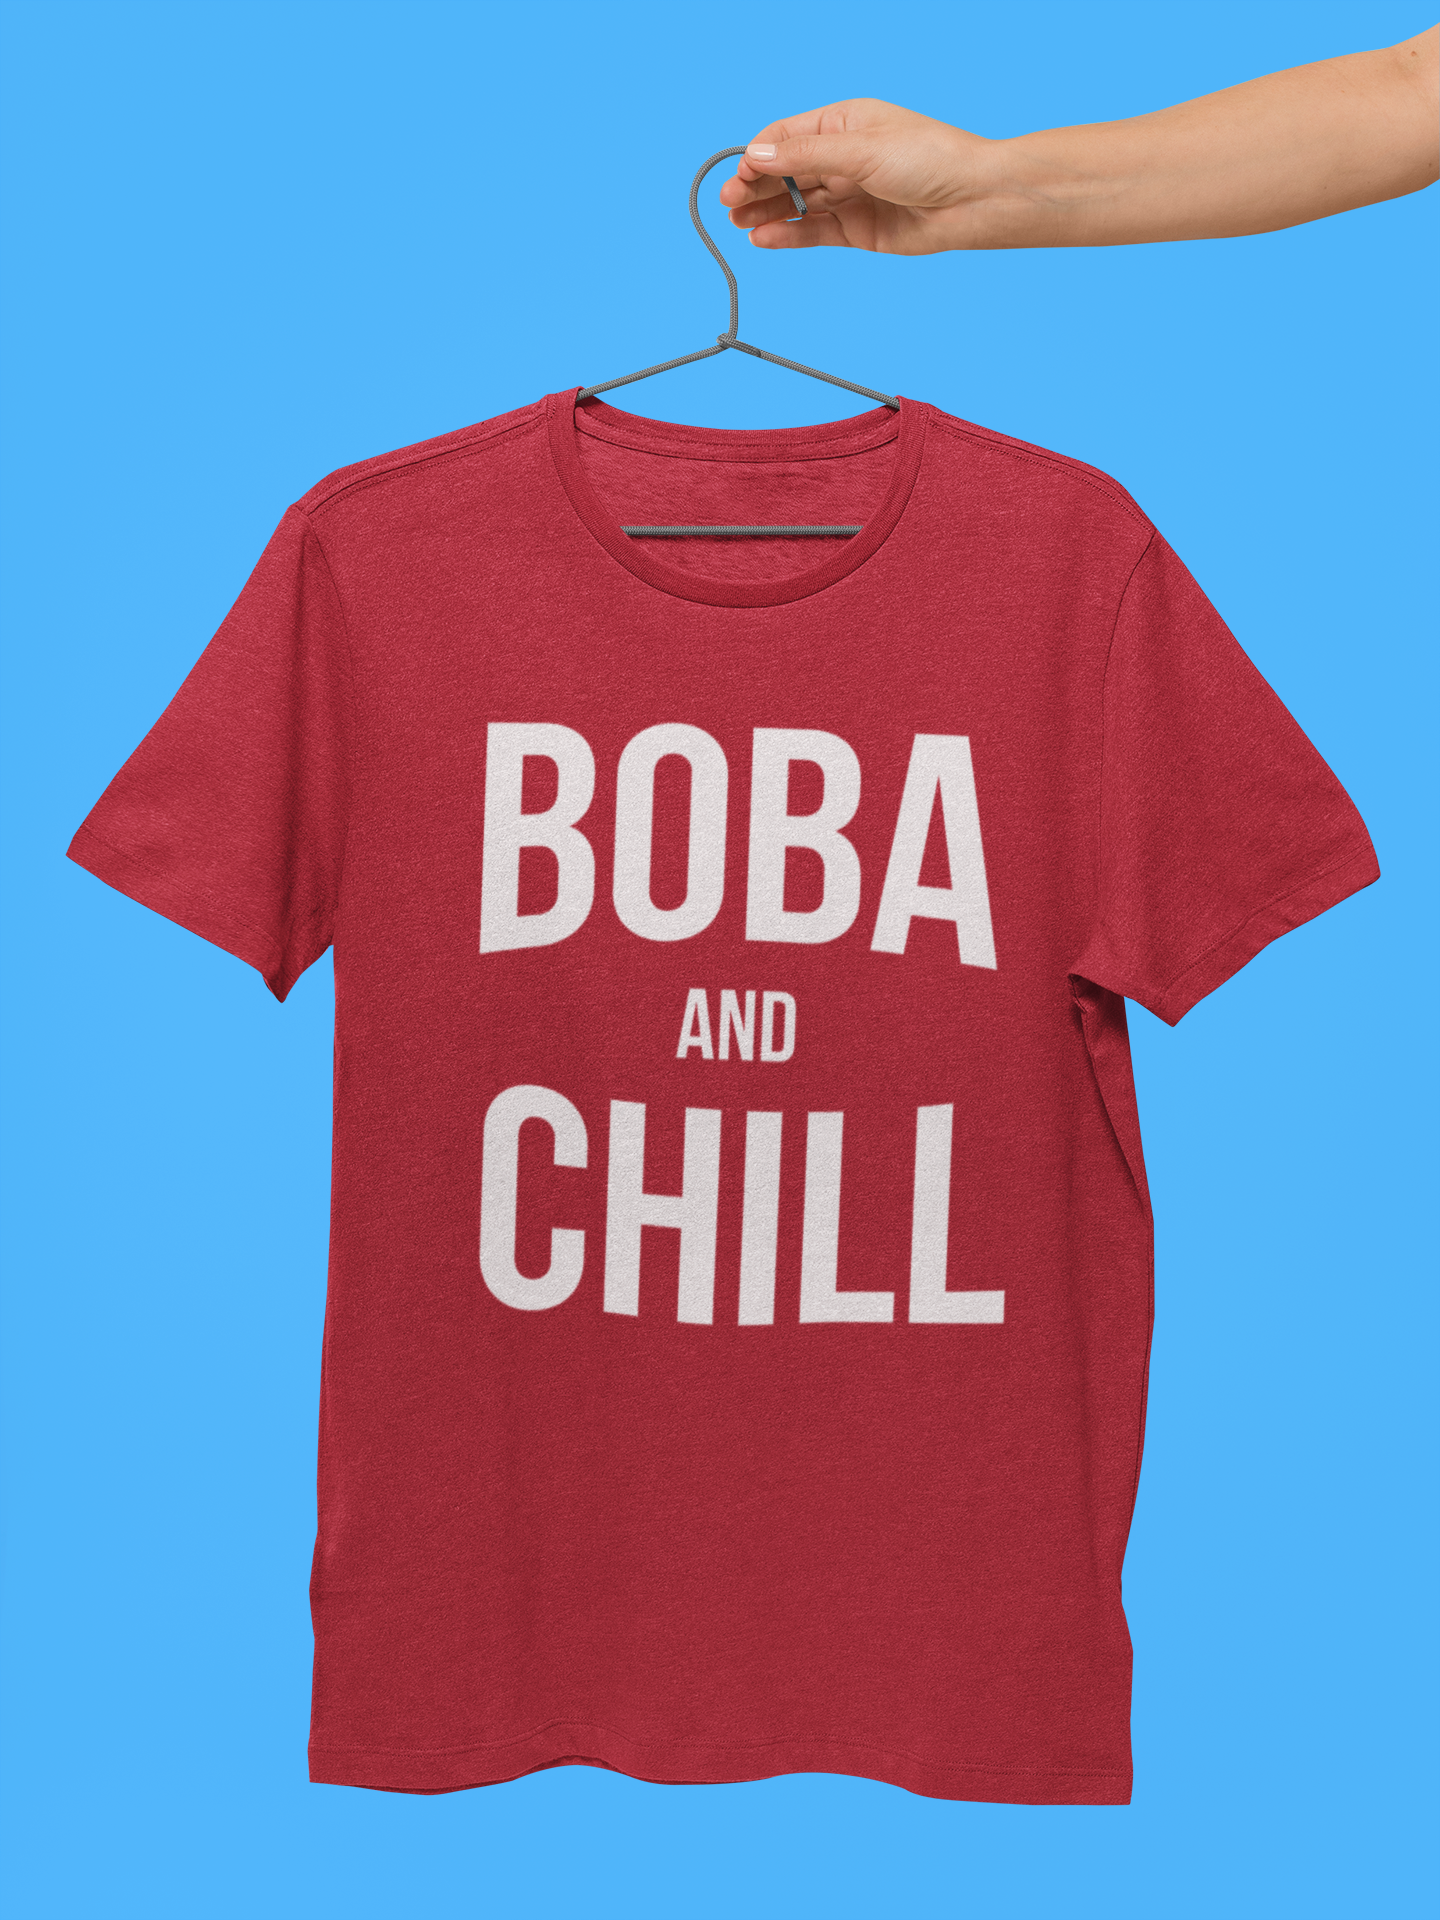 Someone holding Boba and Chill Shirt